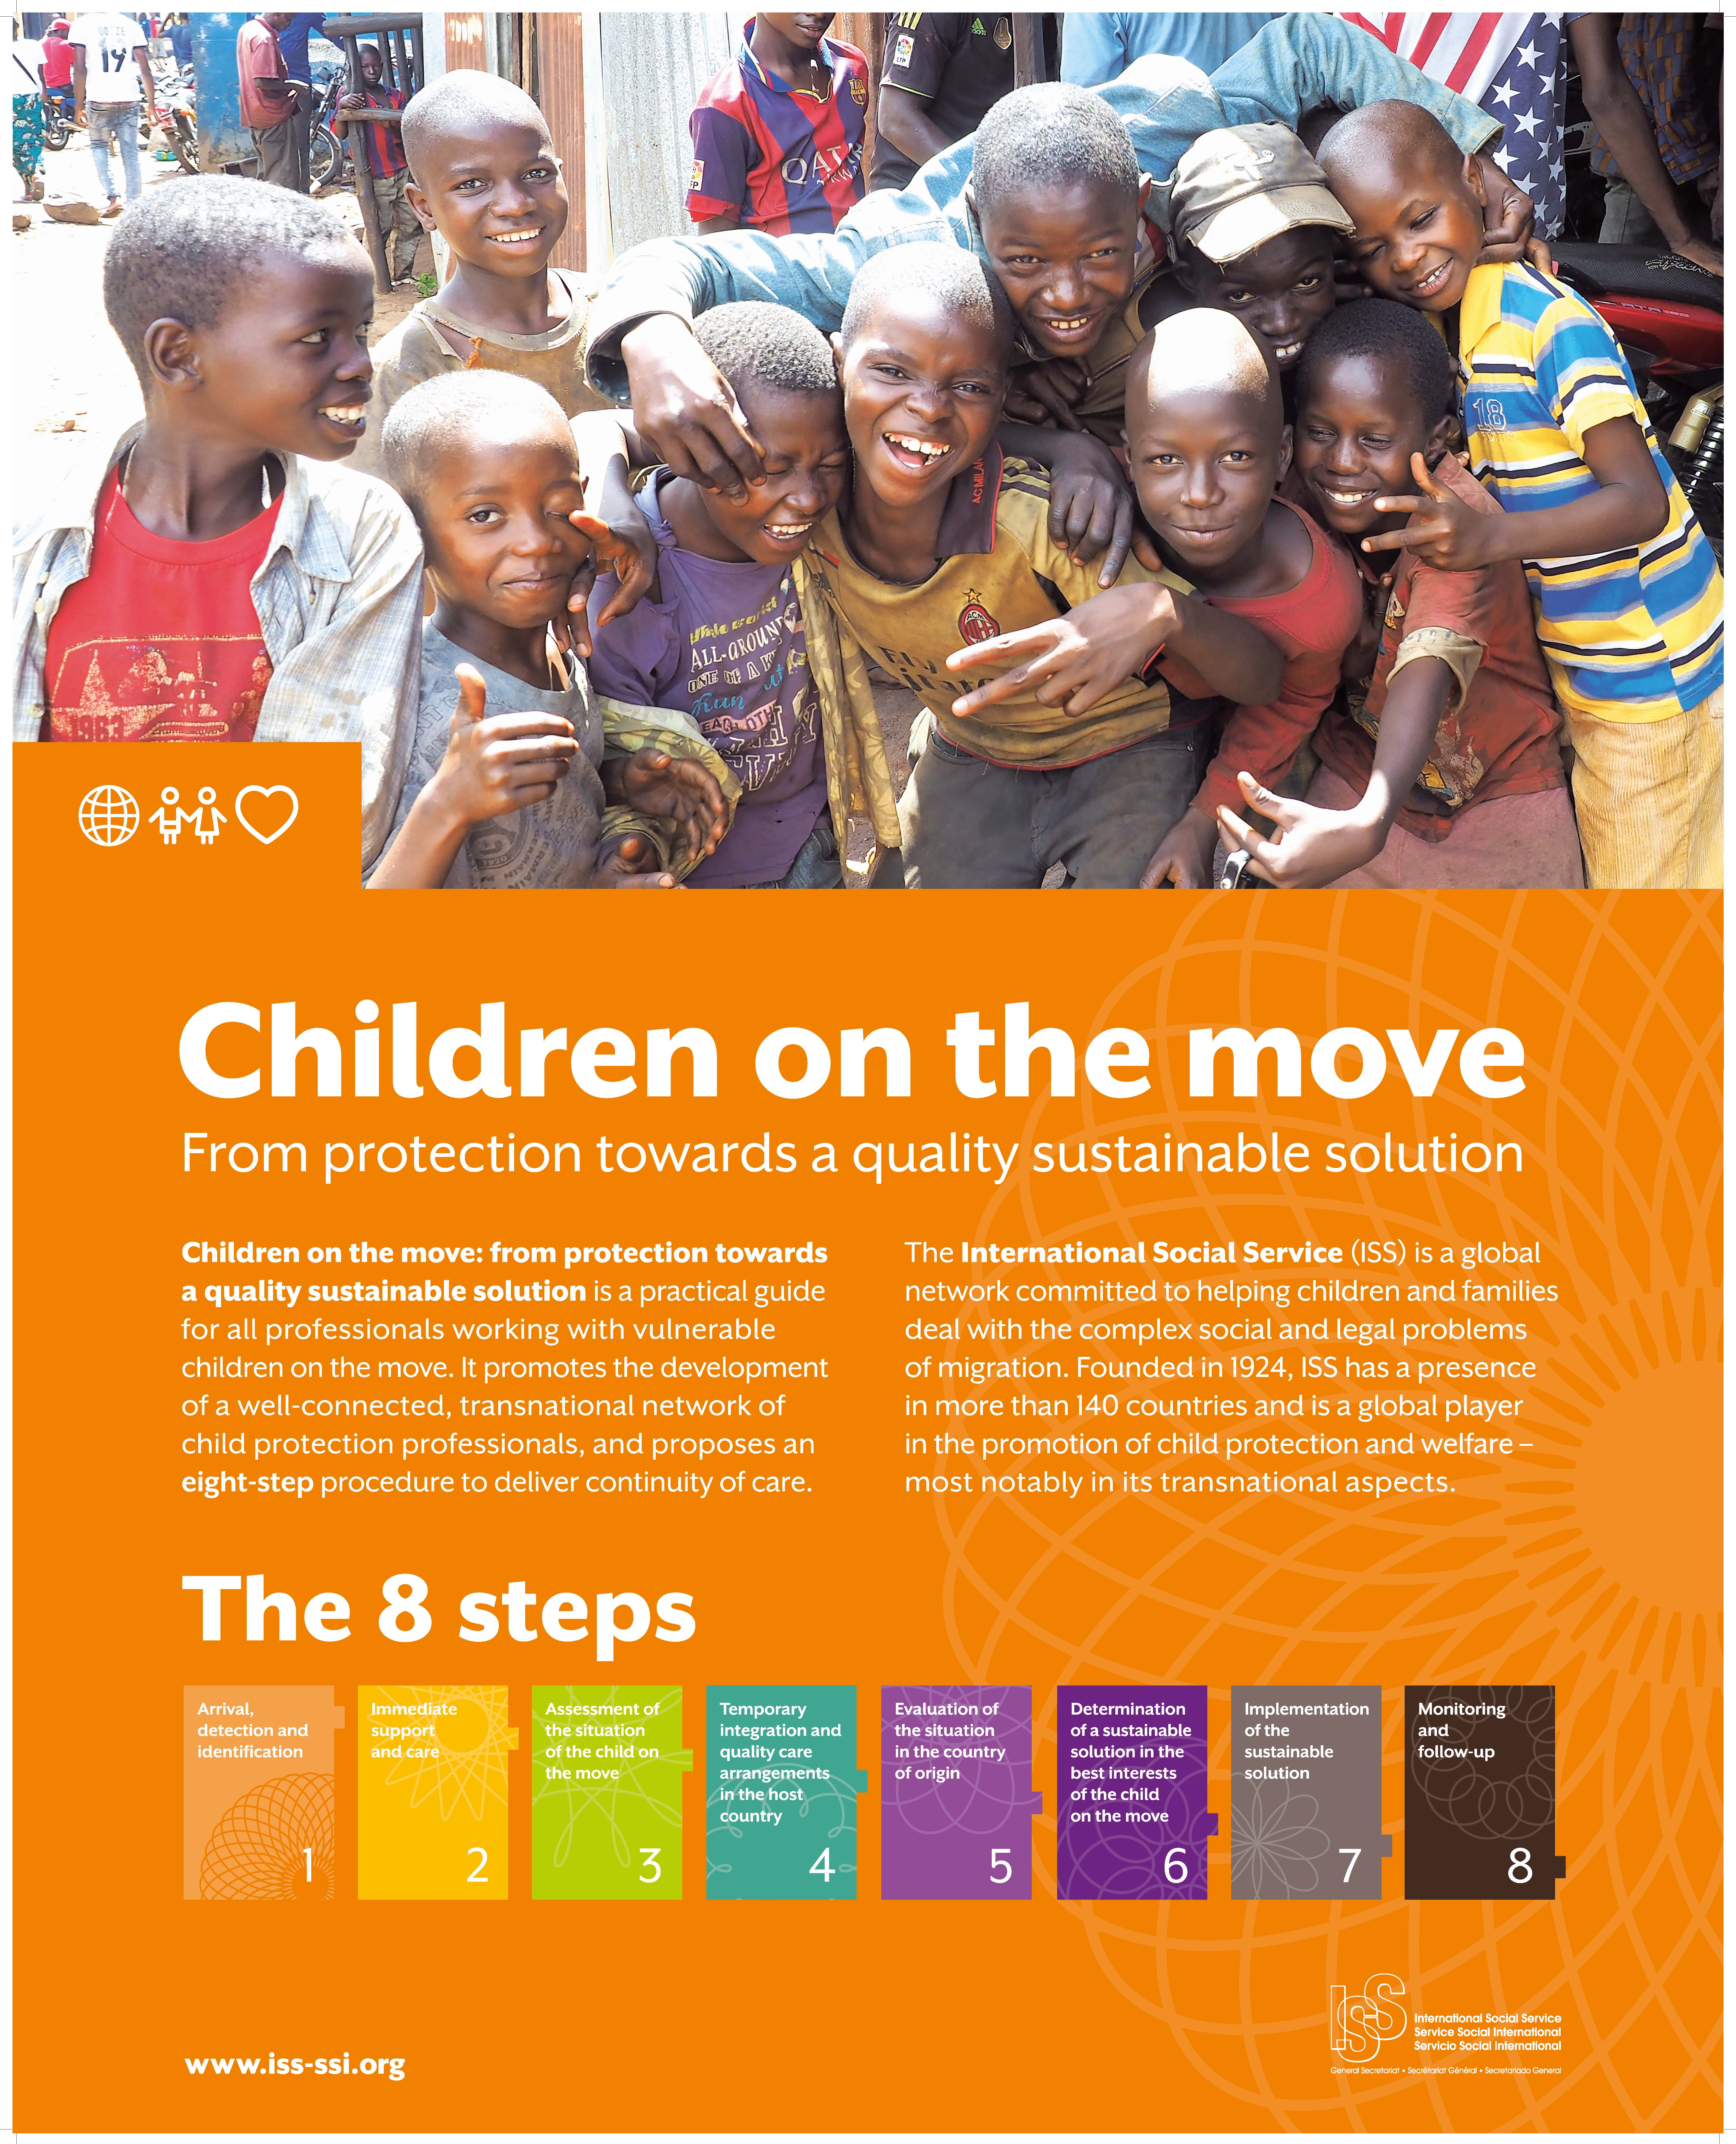 ISS Handbuch "Children on the move"